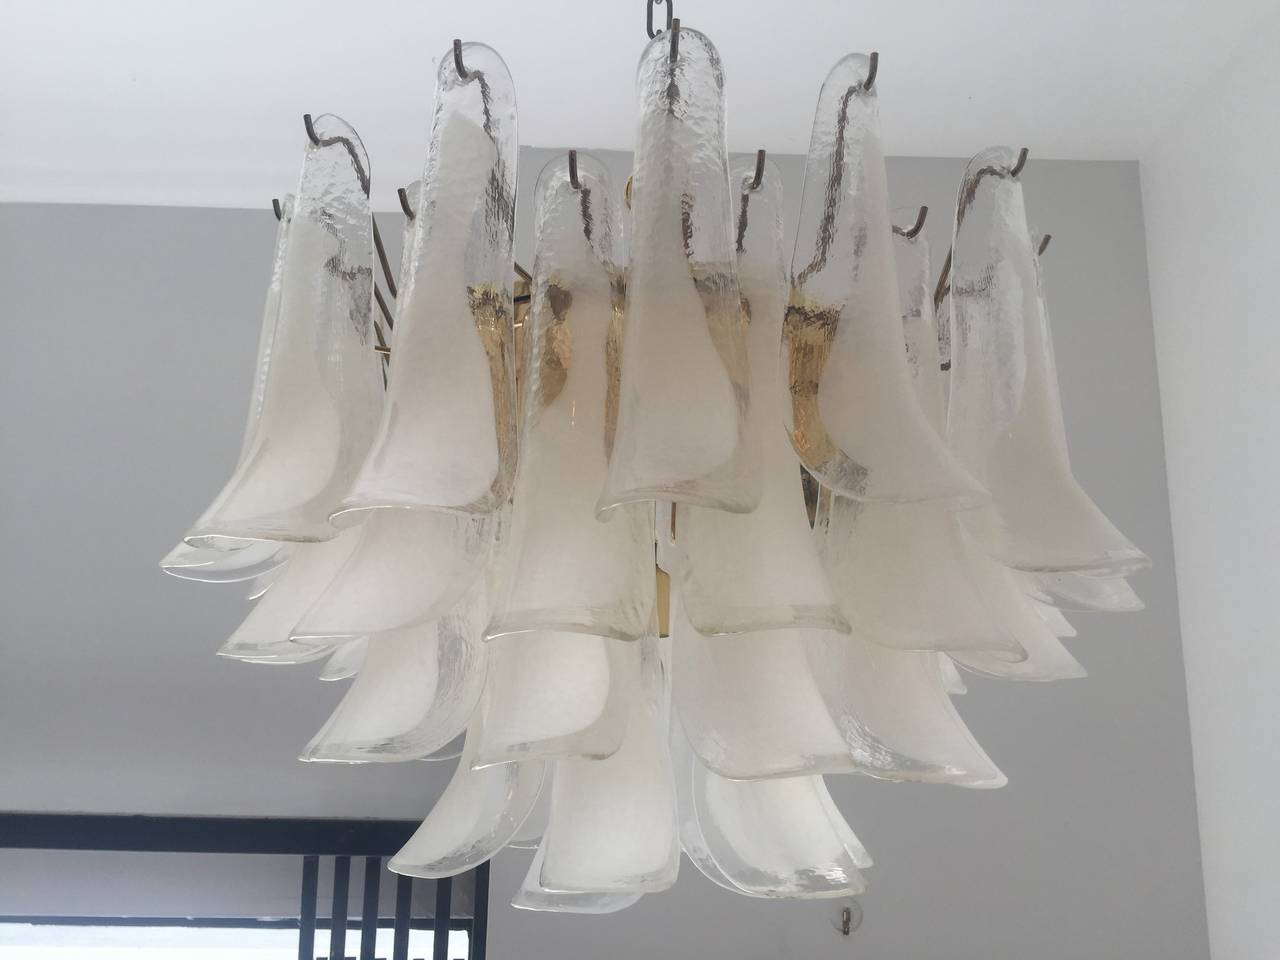 A wonderful warm blown Murano glass pendant composed of 47 white and clear petals on a polished brass frame. 11 light sources. Rewired . Matching canopy and extra chain for desired drop.